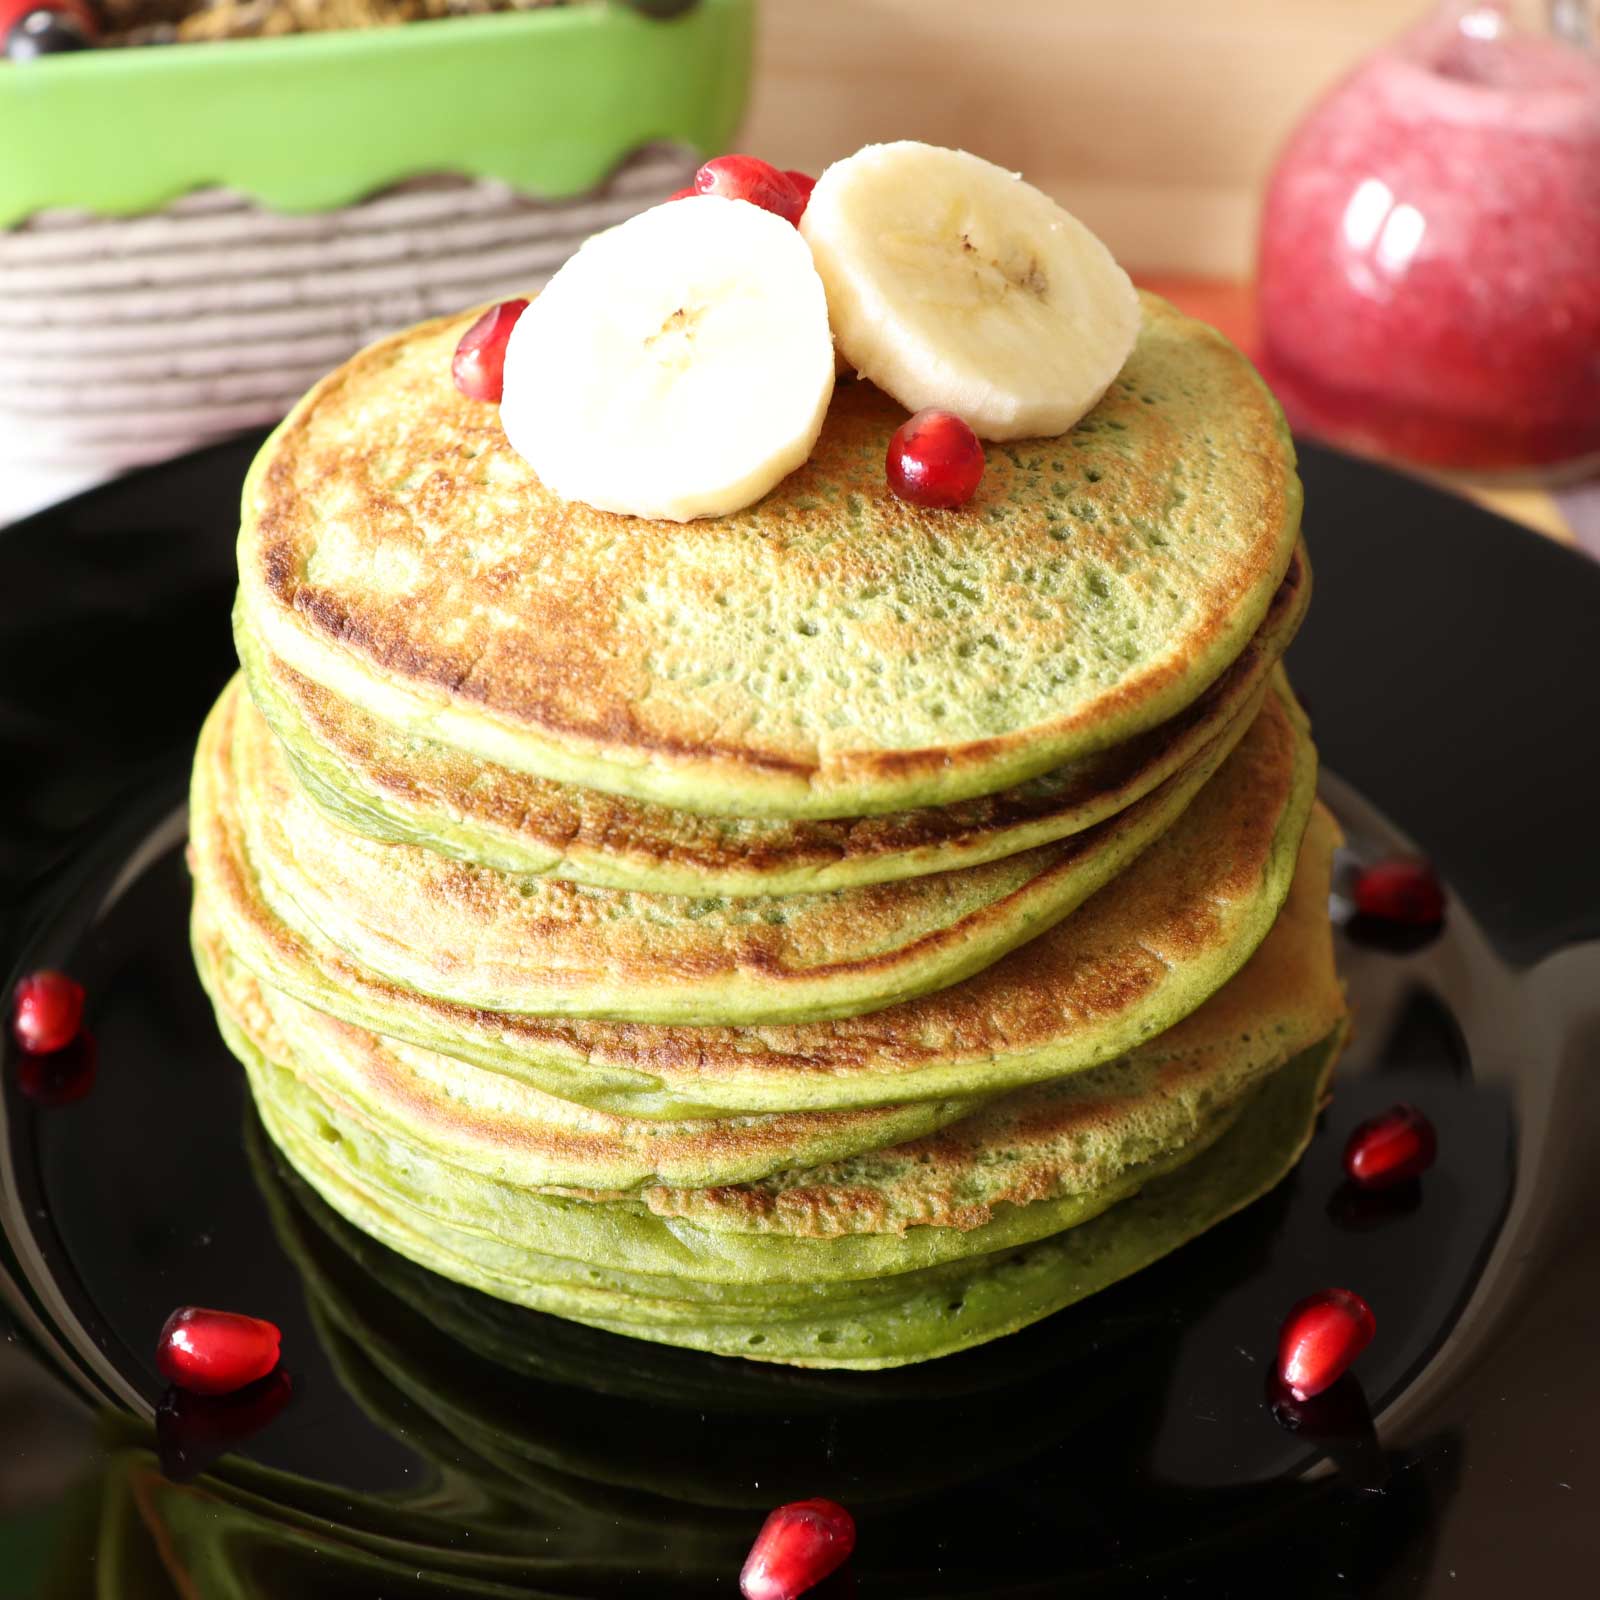 Fluffy and delicious eggless green pancakes made with spinach and banana, plant based vegan recipe for tasty pancakes